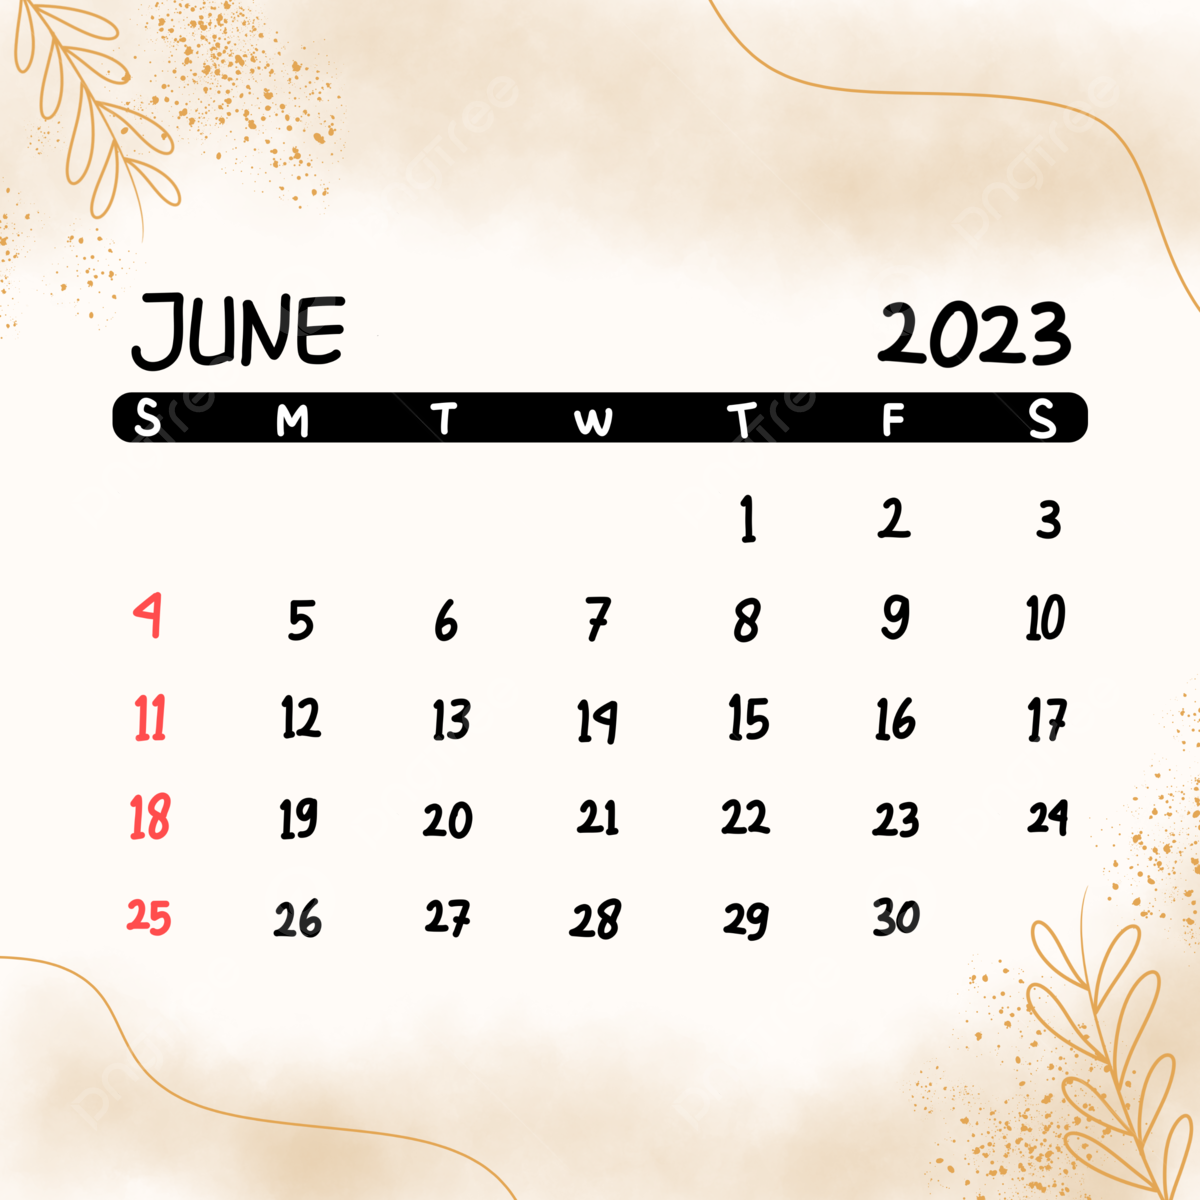 2023 Calendar Backgrounds Image, HD Pictures and Wallpapers For Free Download